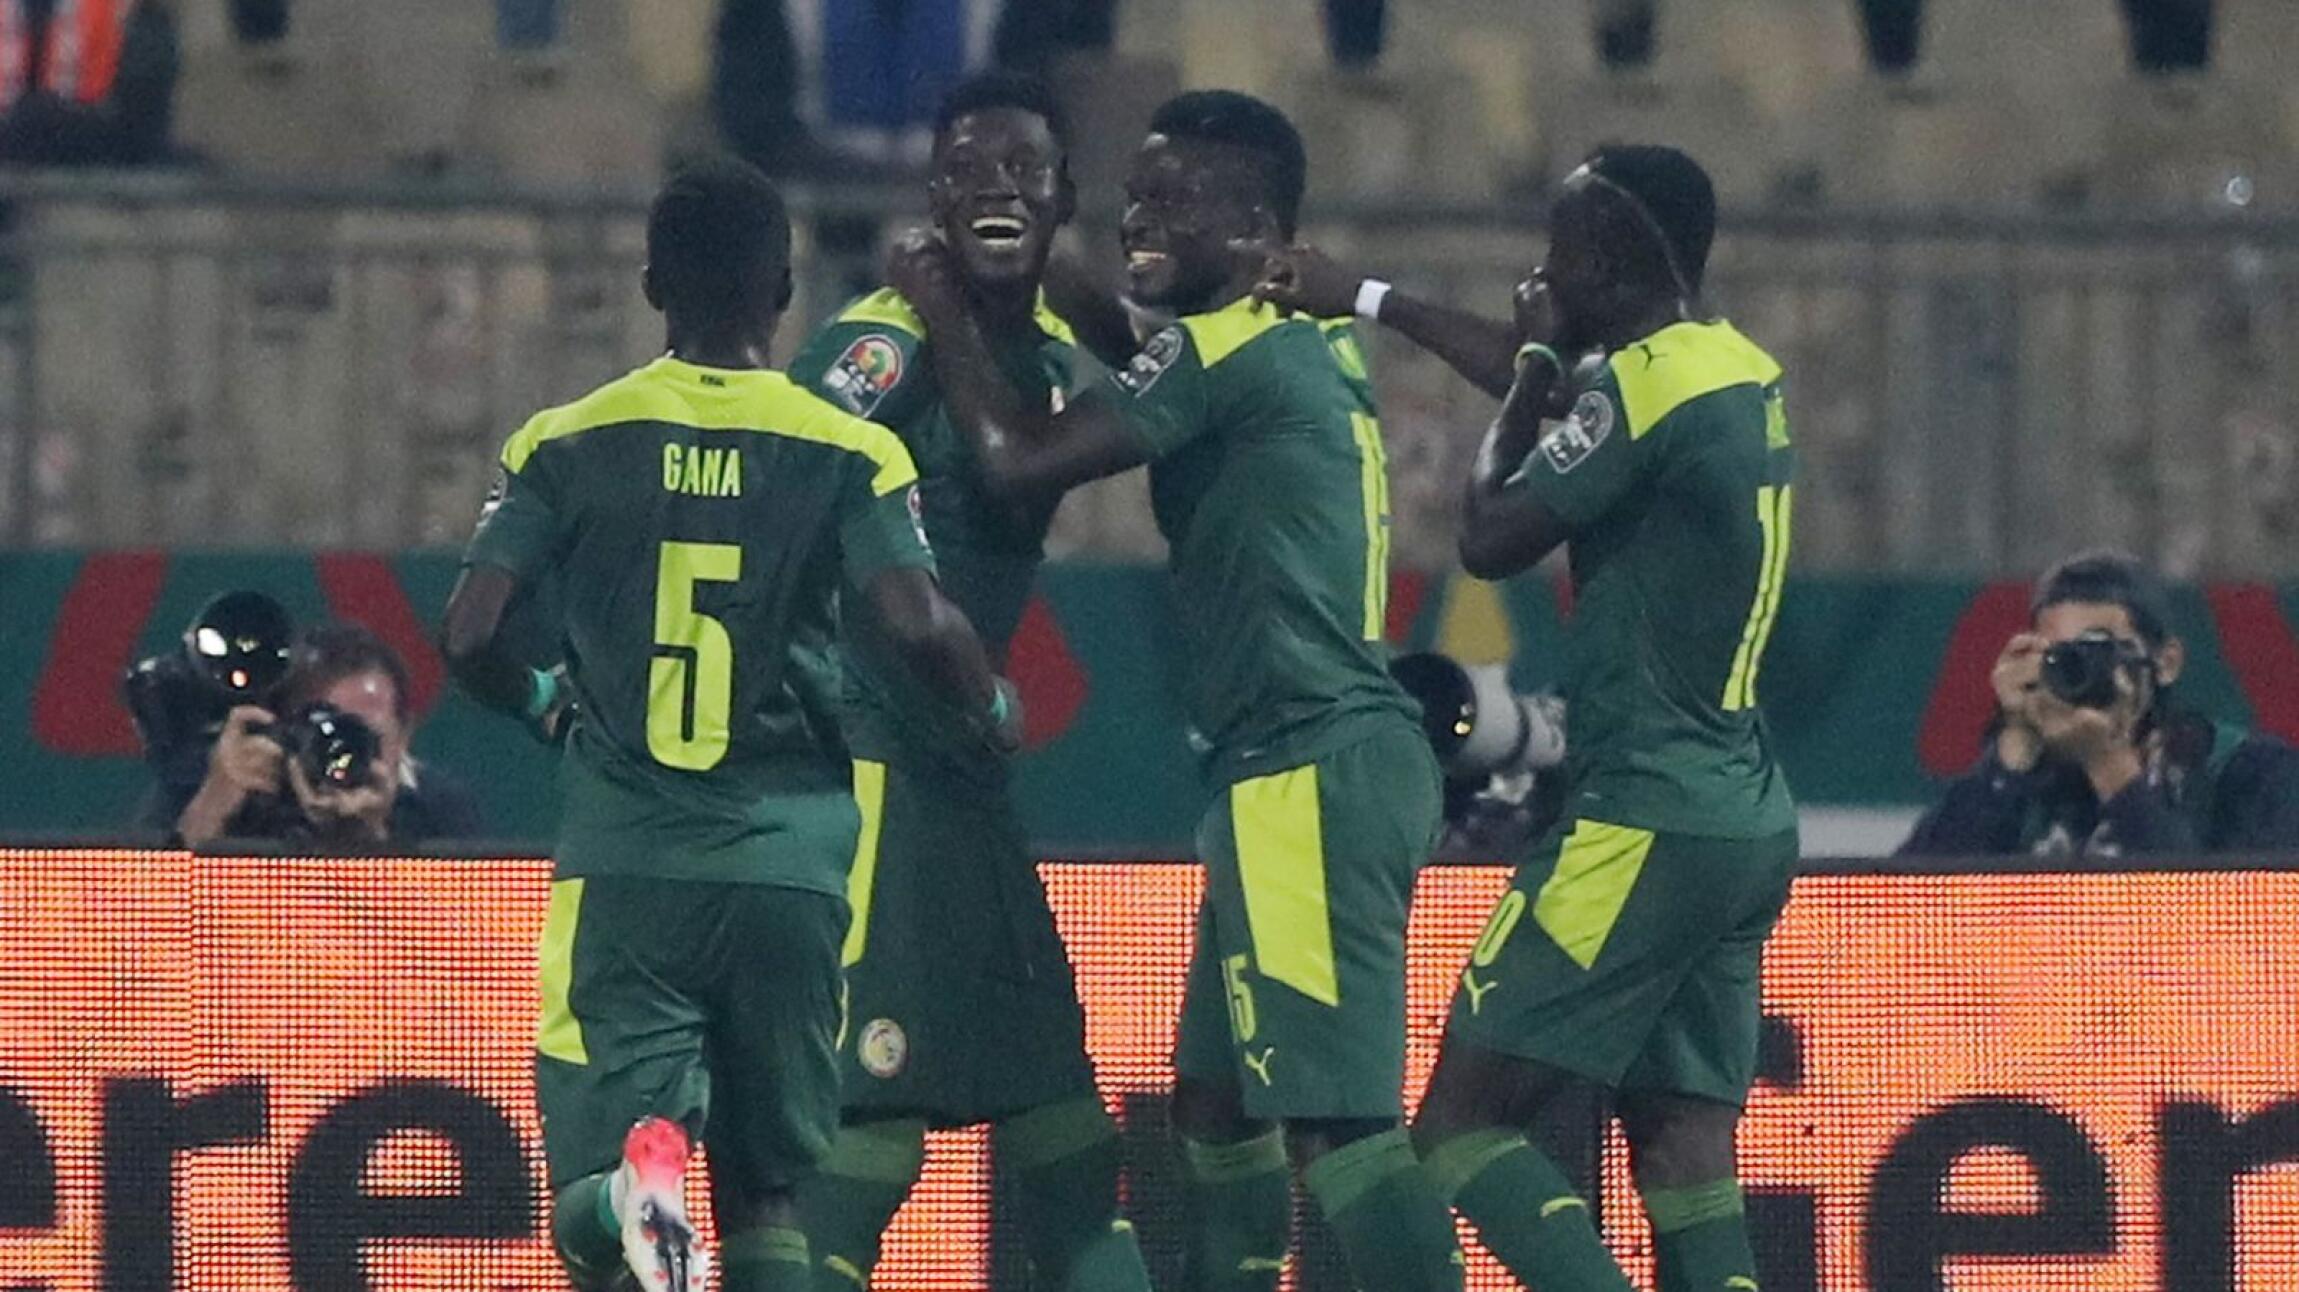 Senegal's Ismaila Sarr celebrates with Bamba Dieng, Sadio Mane and Idrissa Gana Gueye after scoring their third goal during their Africa Cup of Nations quarter-final against  Equatorial Guinea